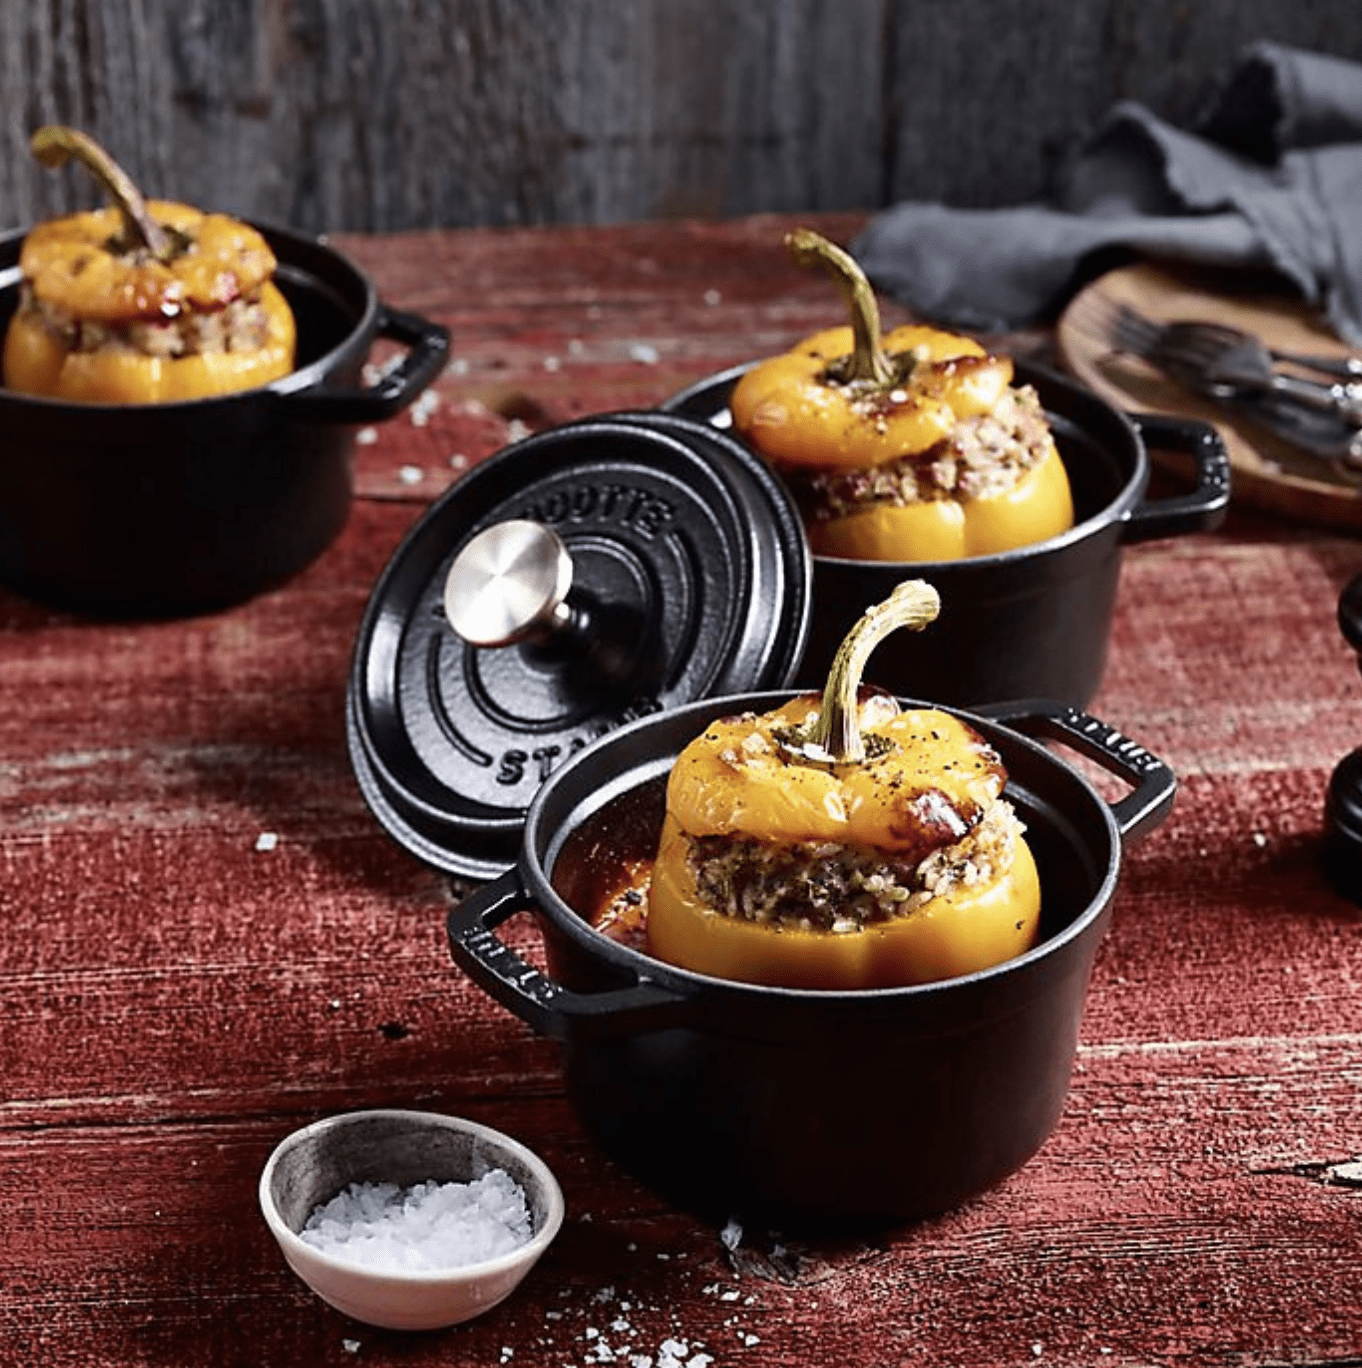 Shop Dutch ovens from Staub, Lodge and more — all under $100